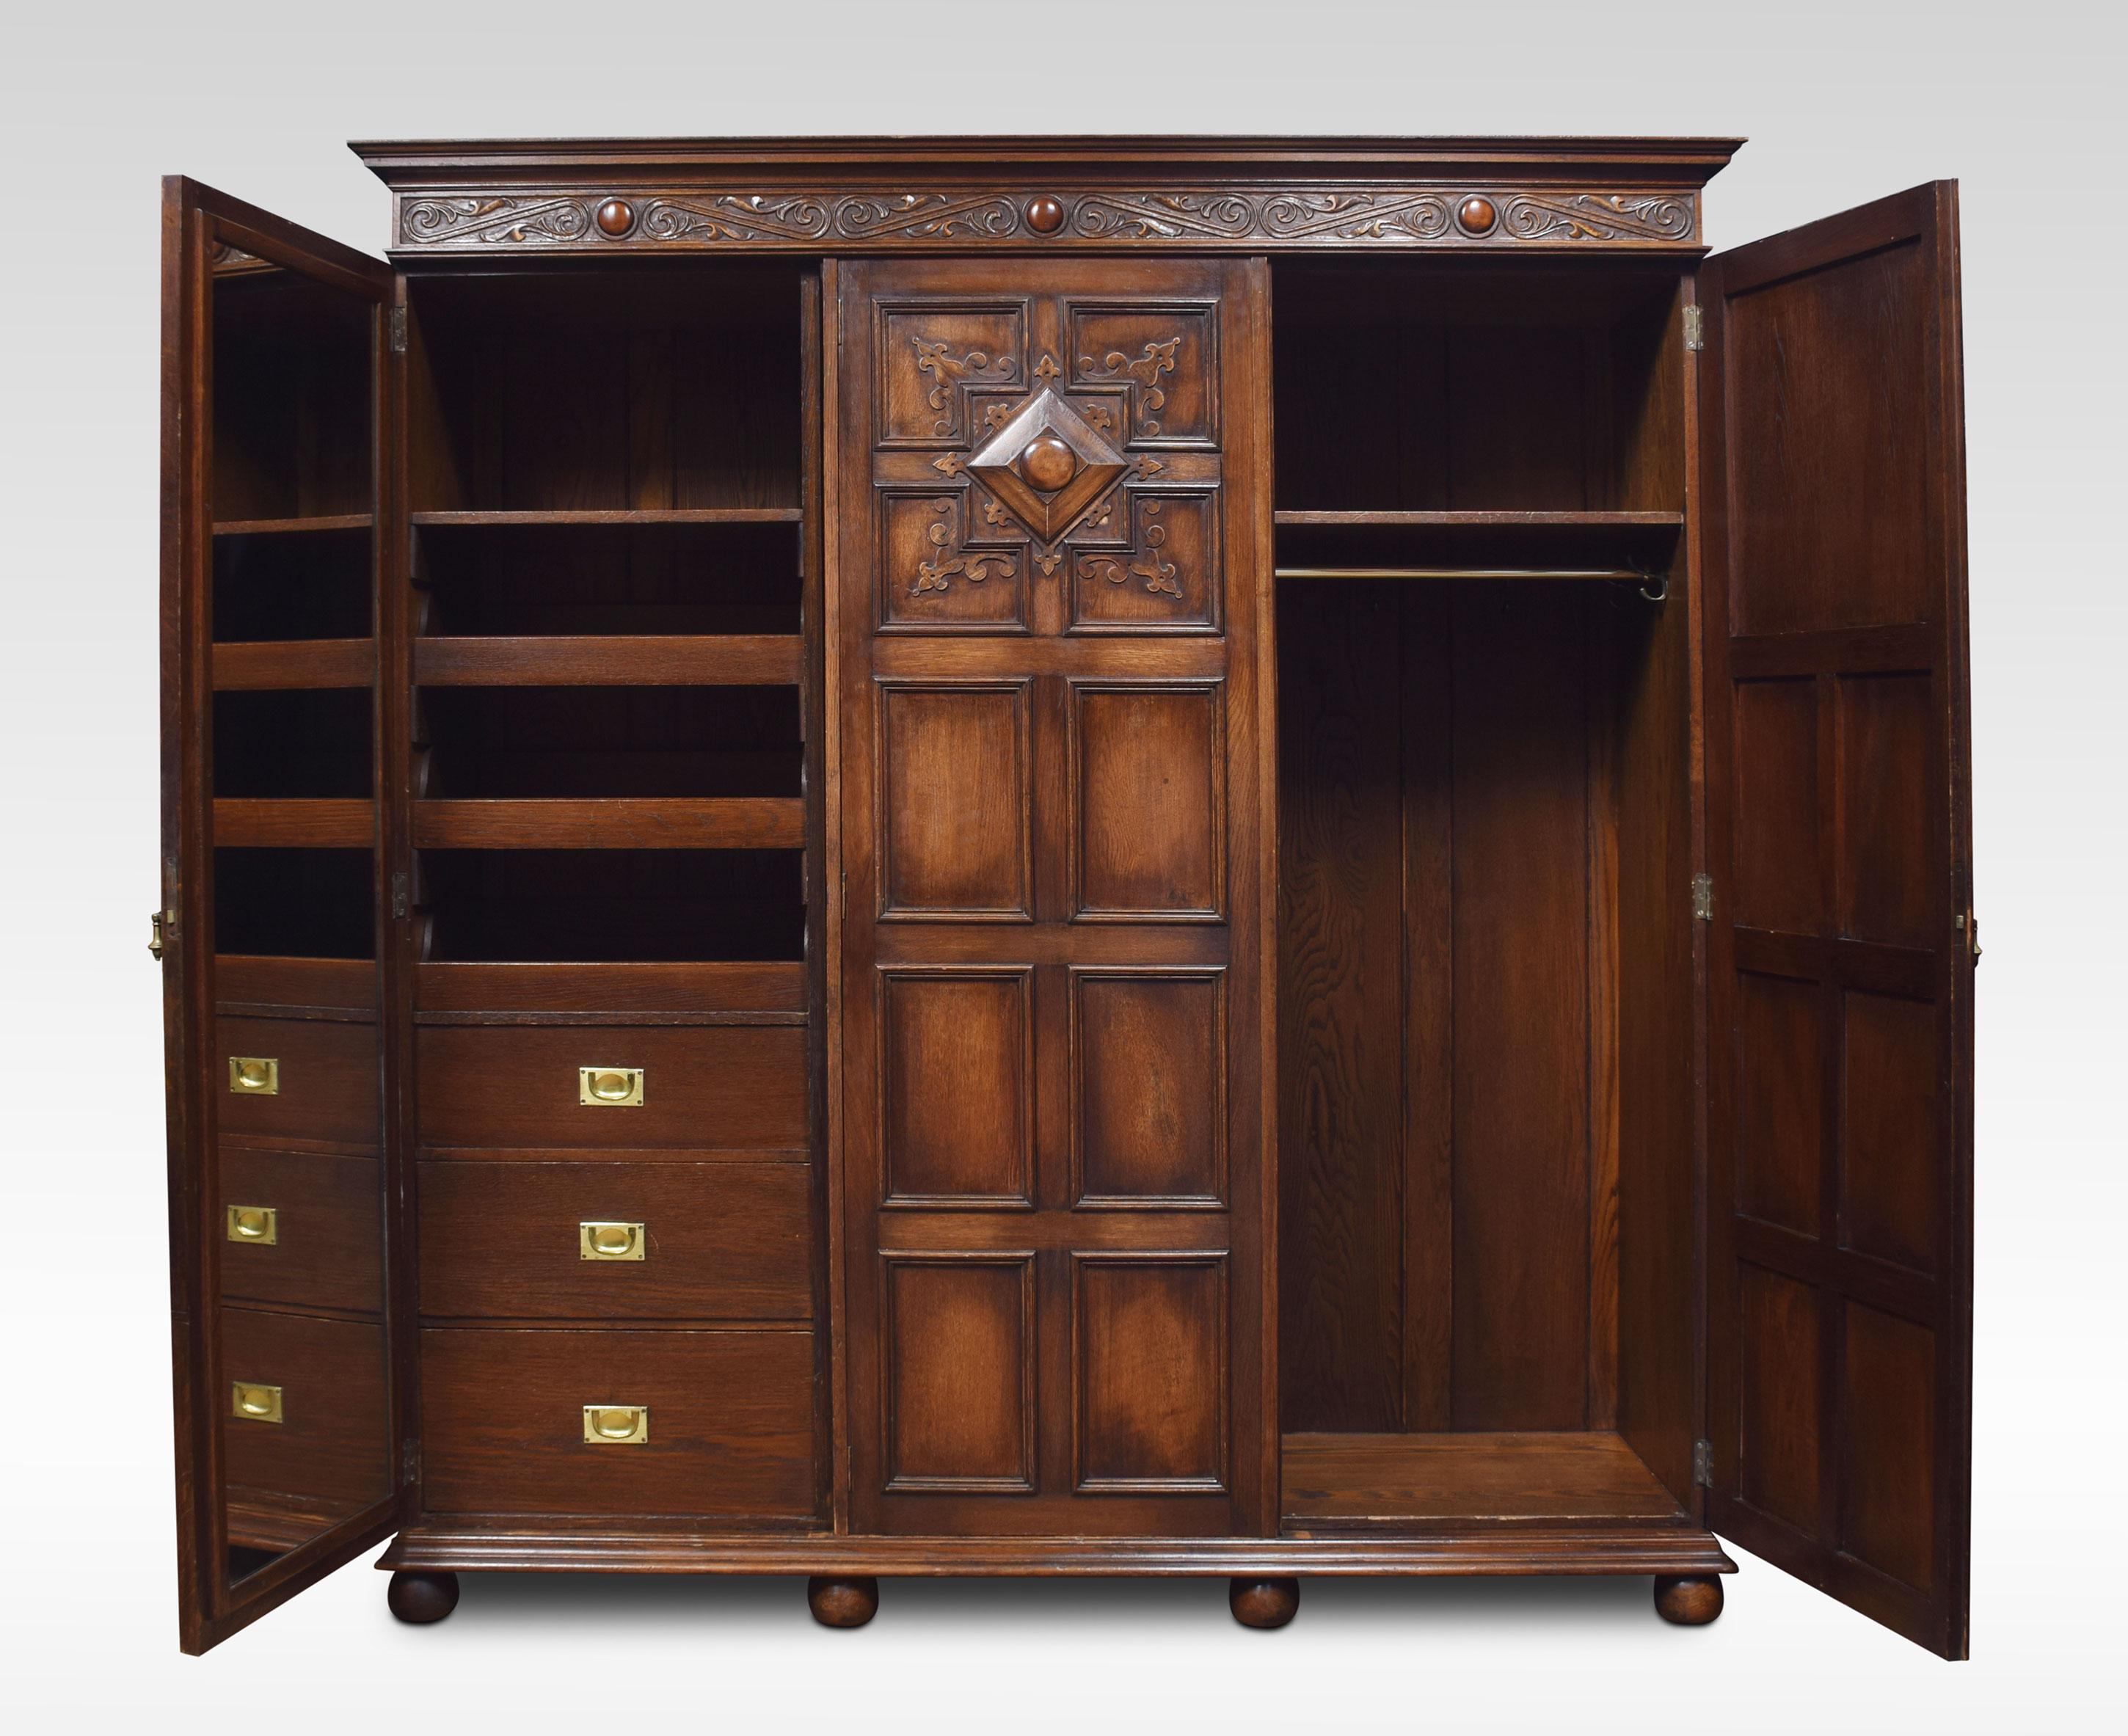 Large solid oak three-door compactum wardrobe. The moulded cornice with blind fret freeze above three geometric paneled doors opening to reveal an internal mirror, large hanging area to one side the other fitted with three drawers and two linen